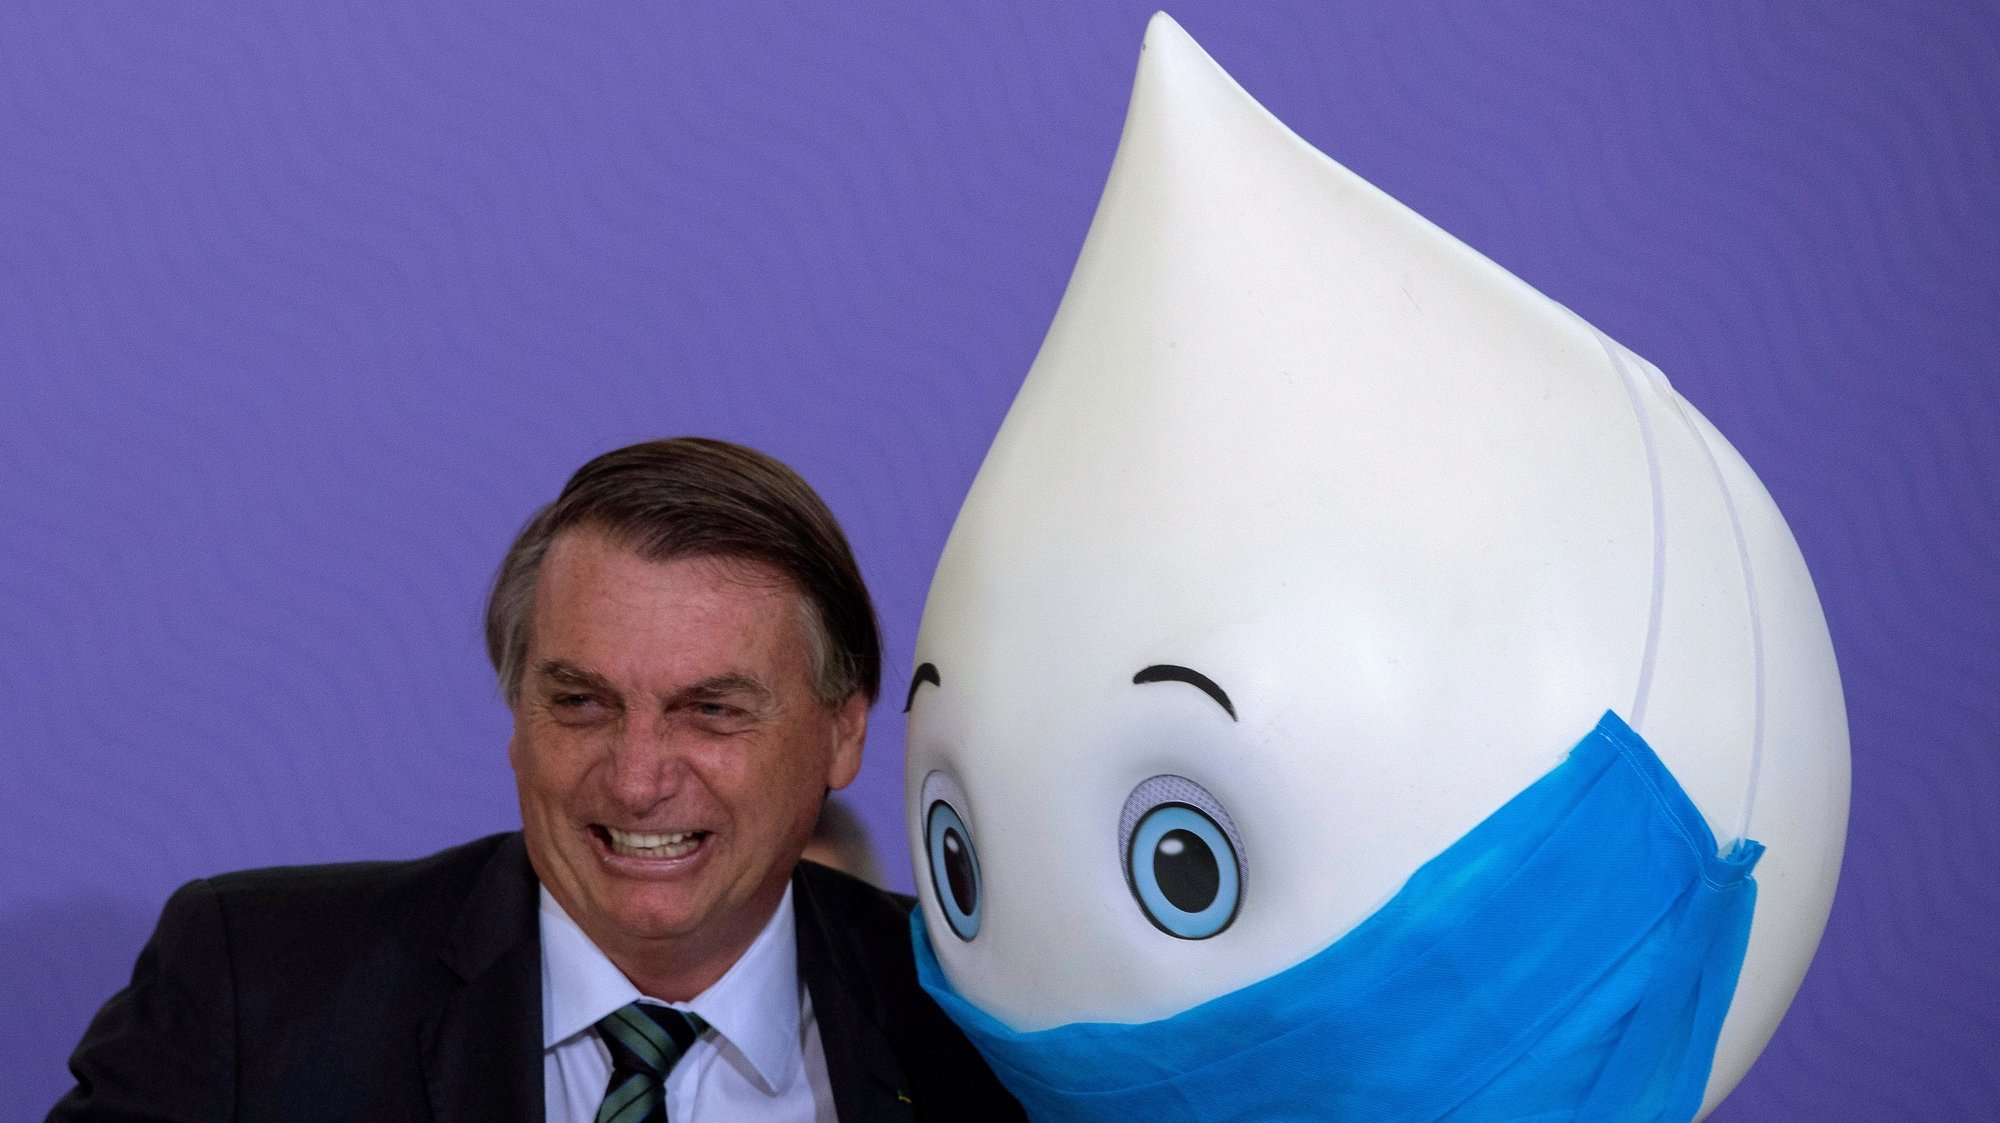 epa08887785 Brazilian President Jair Bolsonaro poses for photos with the mascot Ze Gotinha, a traditional character in Brazil created to raise awareness about vaccines, during the launch of the National Vaccination Plan against covid-19, at the Planalto Palace in Brasilia, Brazil, 16 December 2020. The Brazilian Government presented the master lines of its future vaccination plan against covid-19, which plans to immunize 210 million inhabitants in about 16 months, but has not yet set a start date for the process. According to the Ministry of Health, to establish the day on which the first of the five planned vaccination phases will begin, one must wait for an antidote to be approved and registered by the National Health Surveillance Agency (Anvisa), which could occur for next February.  EPA/Joedson Alves